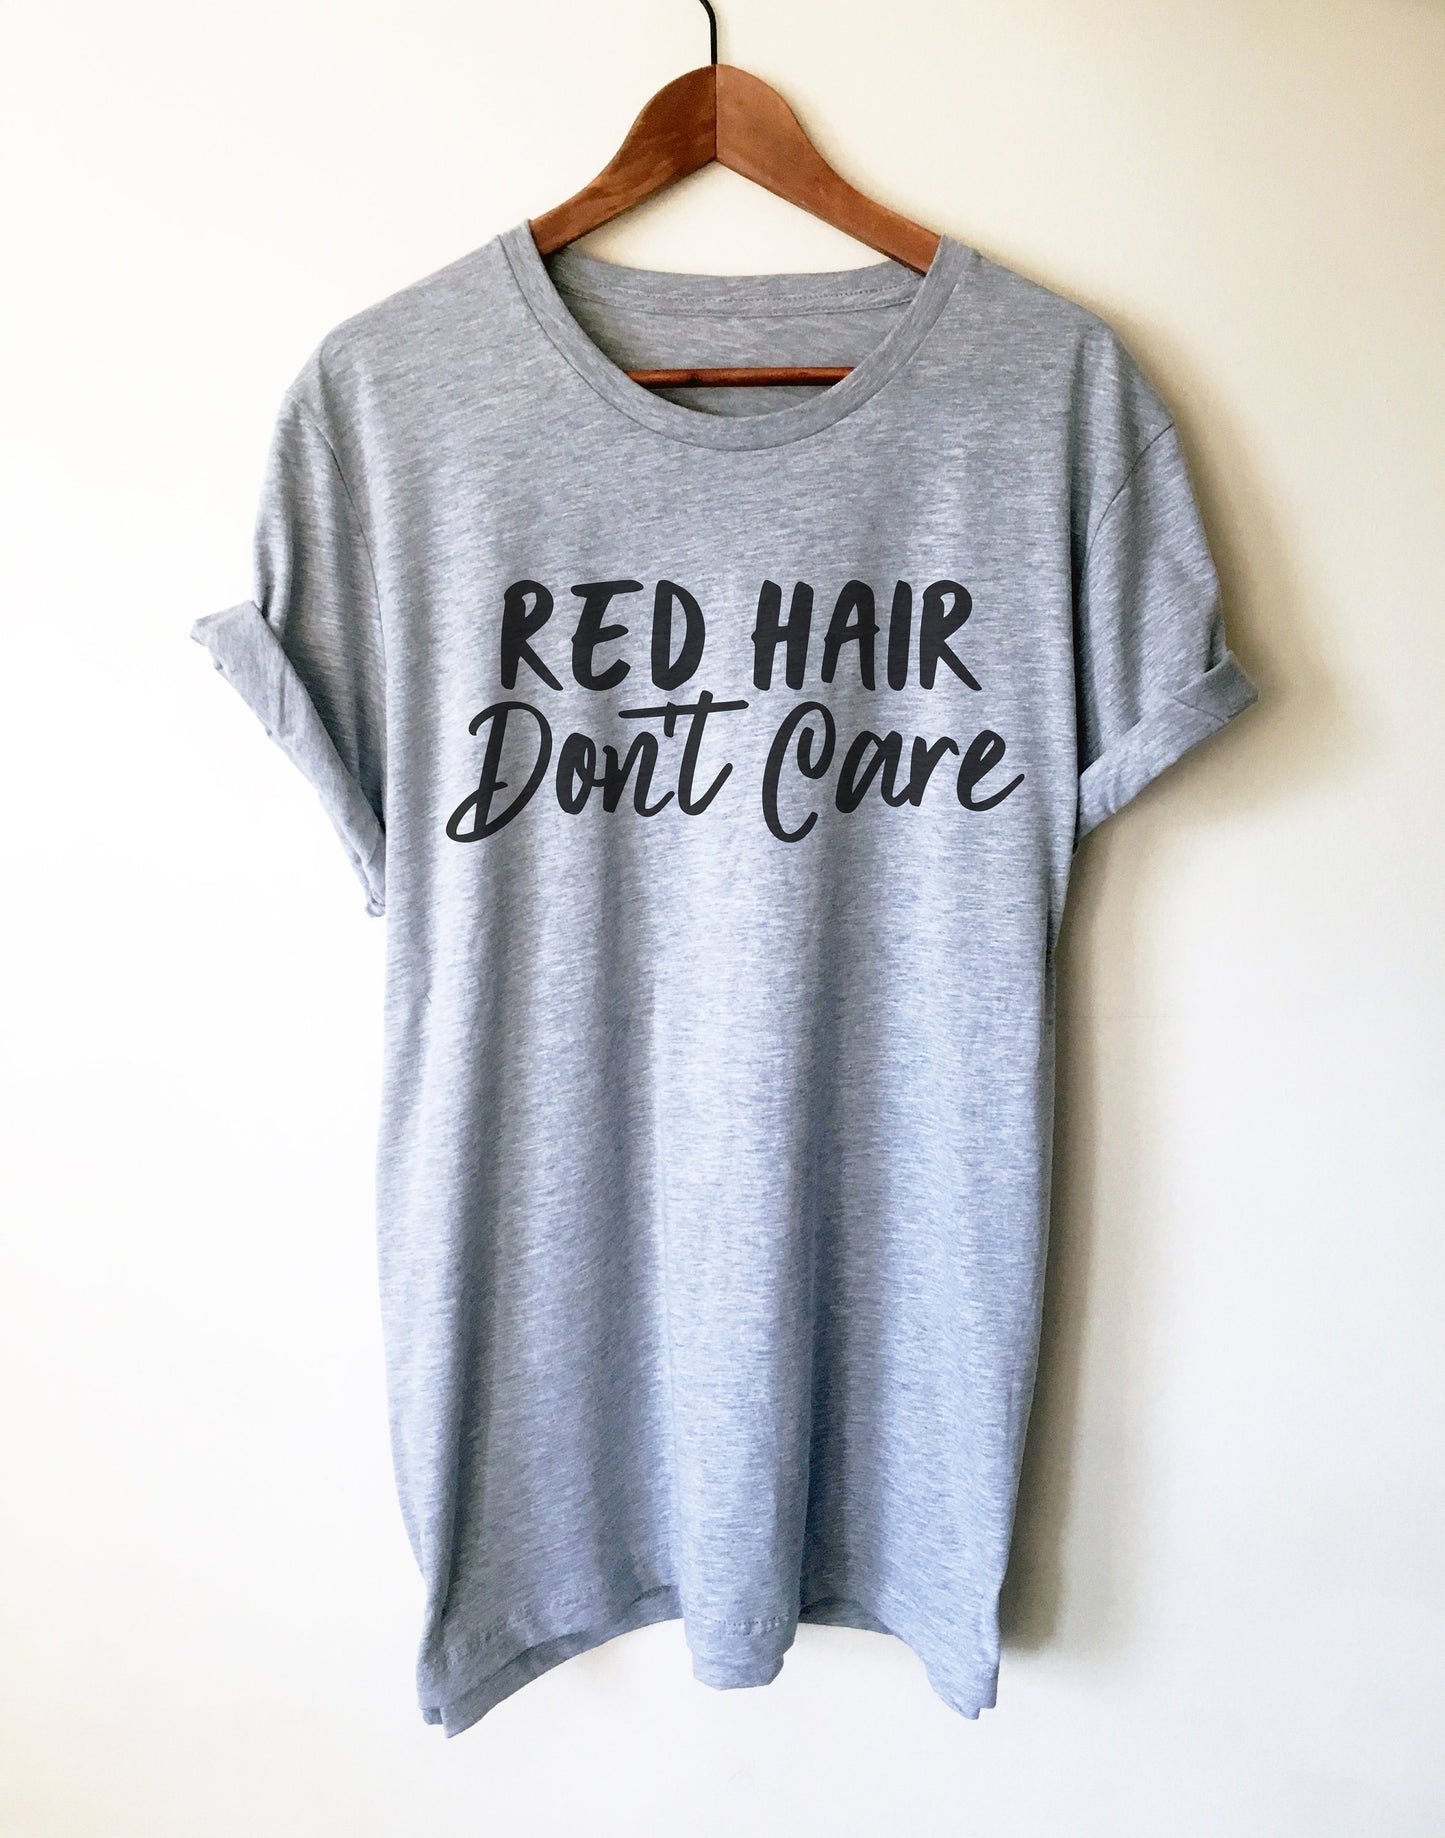 Red Hair Don't Care Unisex Shirt - Redhead Gift, Red Head Shirt, Ginger Hair, Best Friend Gift, Read Hair Gift, Hair Stylist Gift